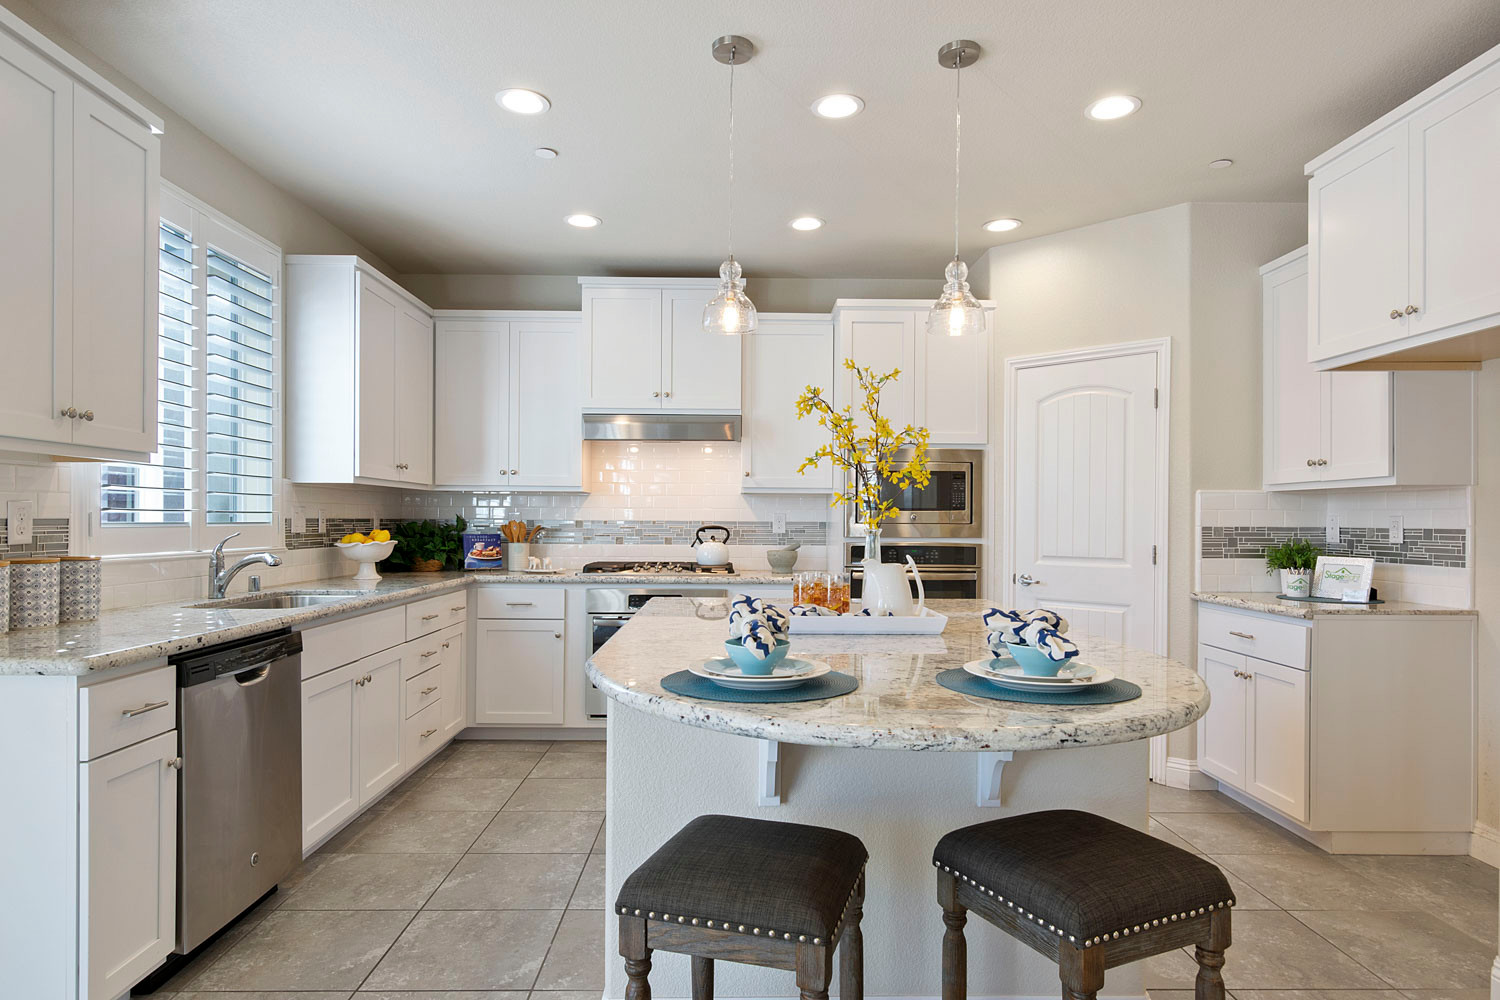 18 Beautiful White Kitchen Cabinets Pictures & Ideas   Houzz